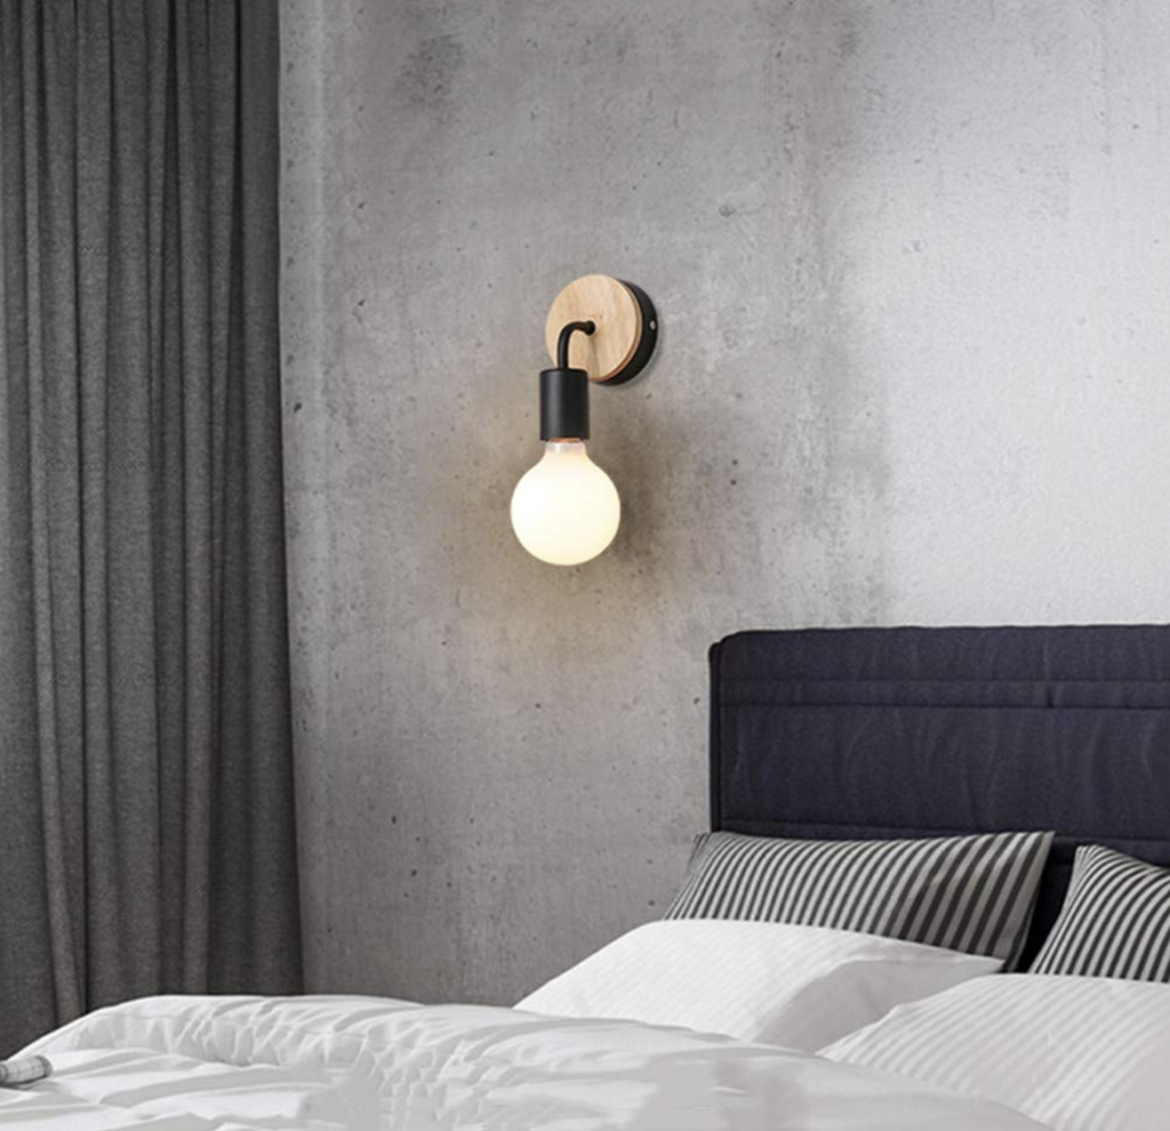 These little wall sconces light up my life | 10 Underrated Amazon Products  | www.lynneknowlton.com